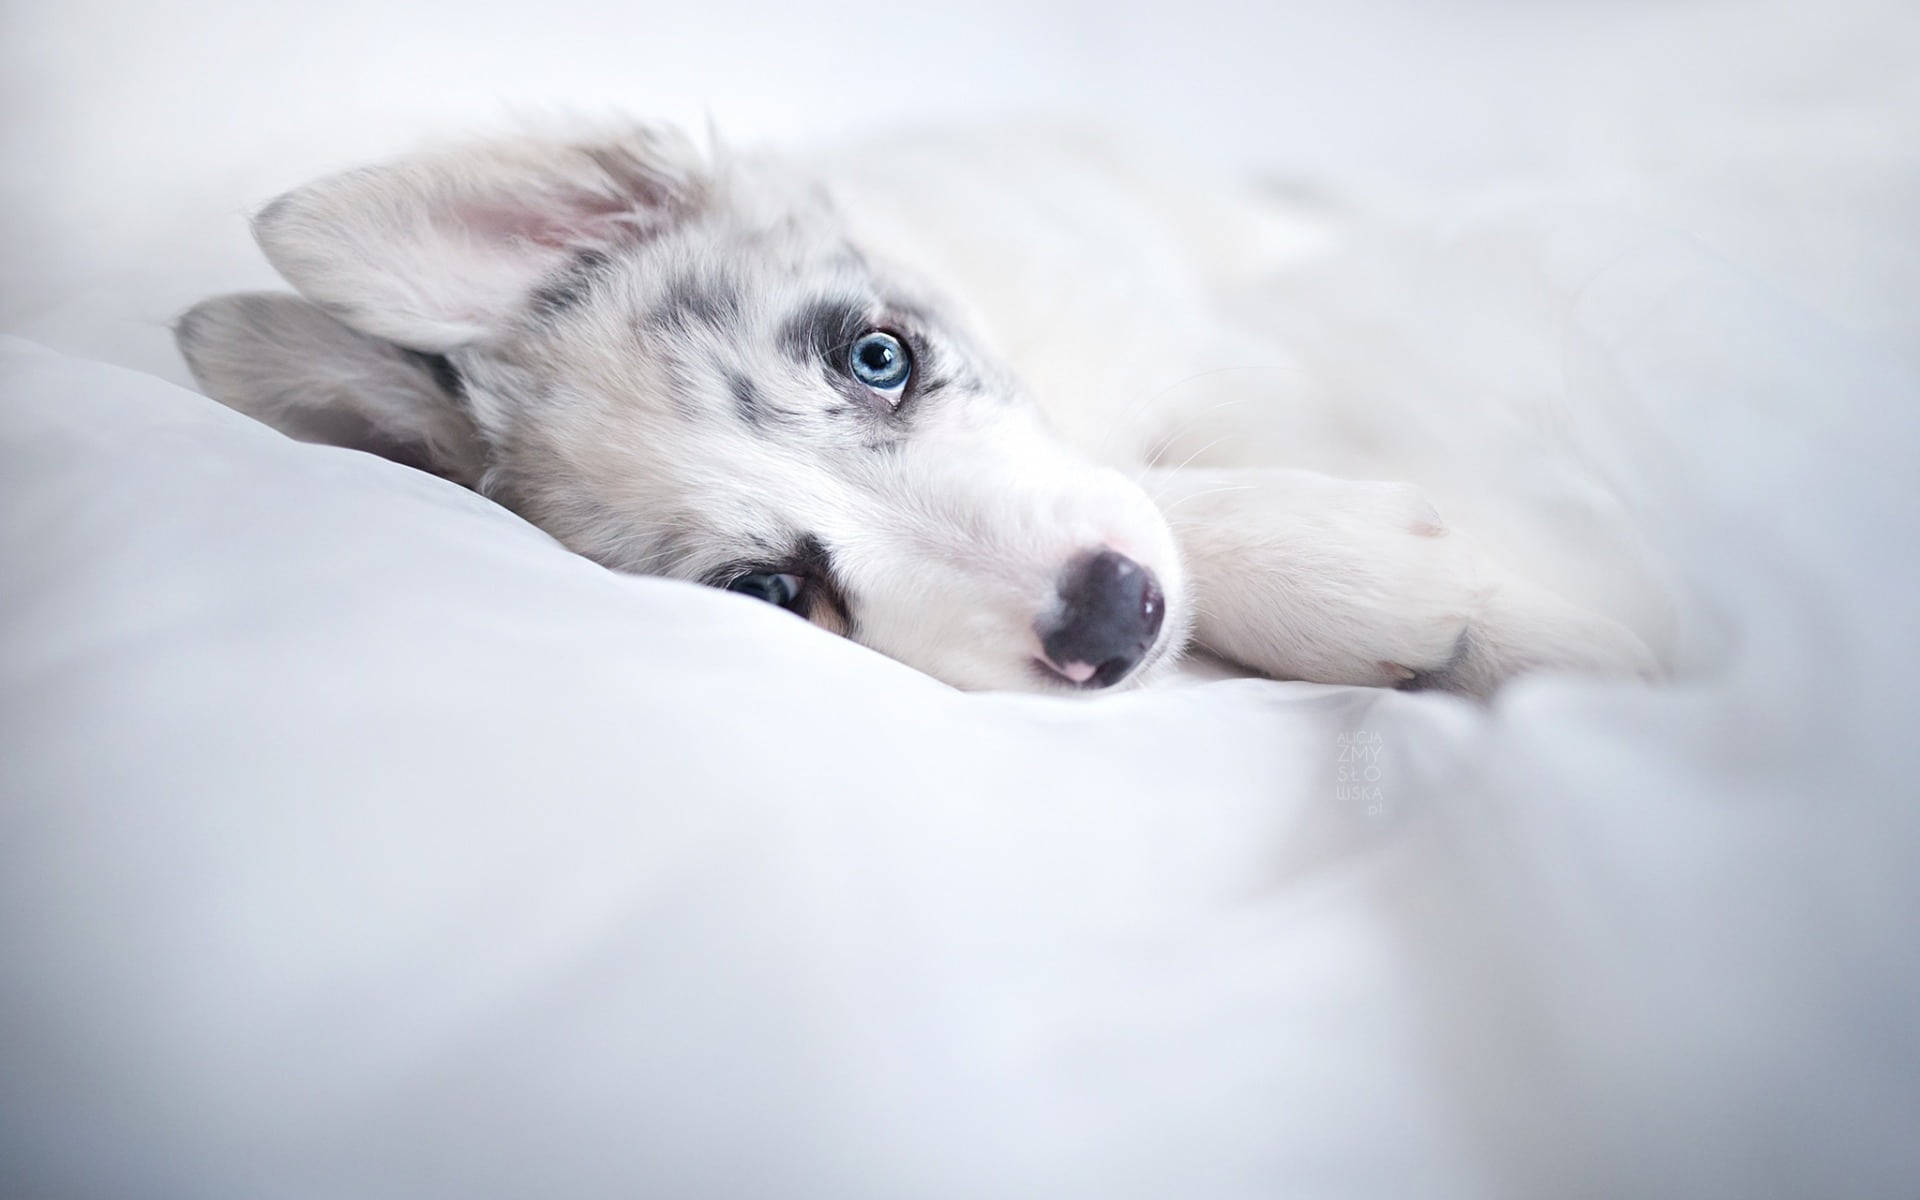 Husky Puppy On White Bed Wallpaper